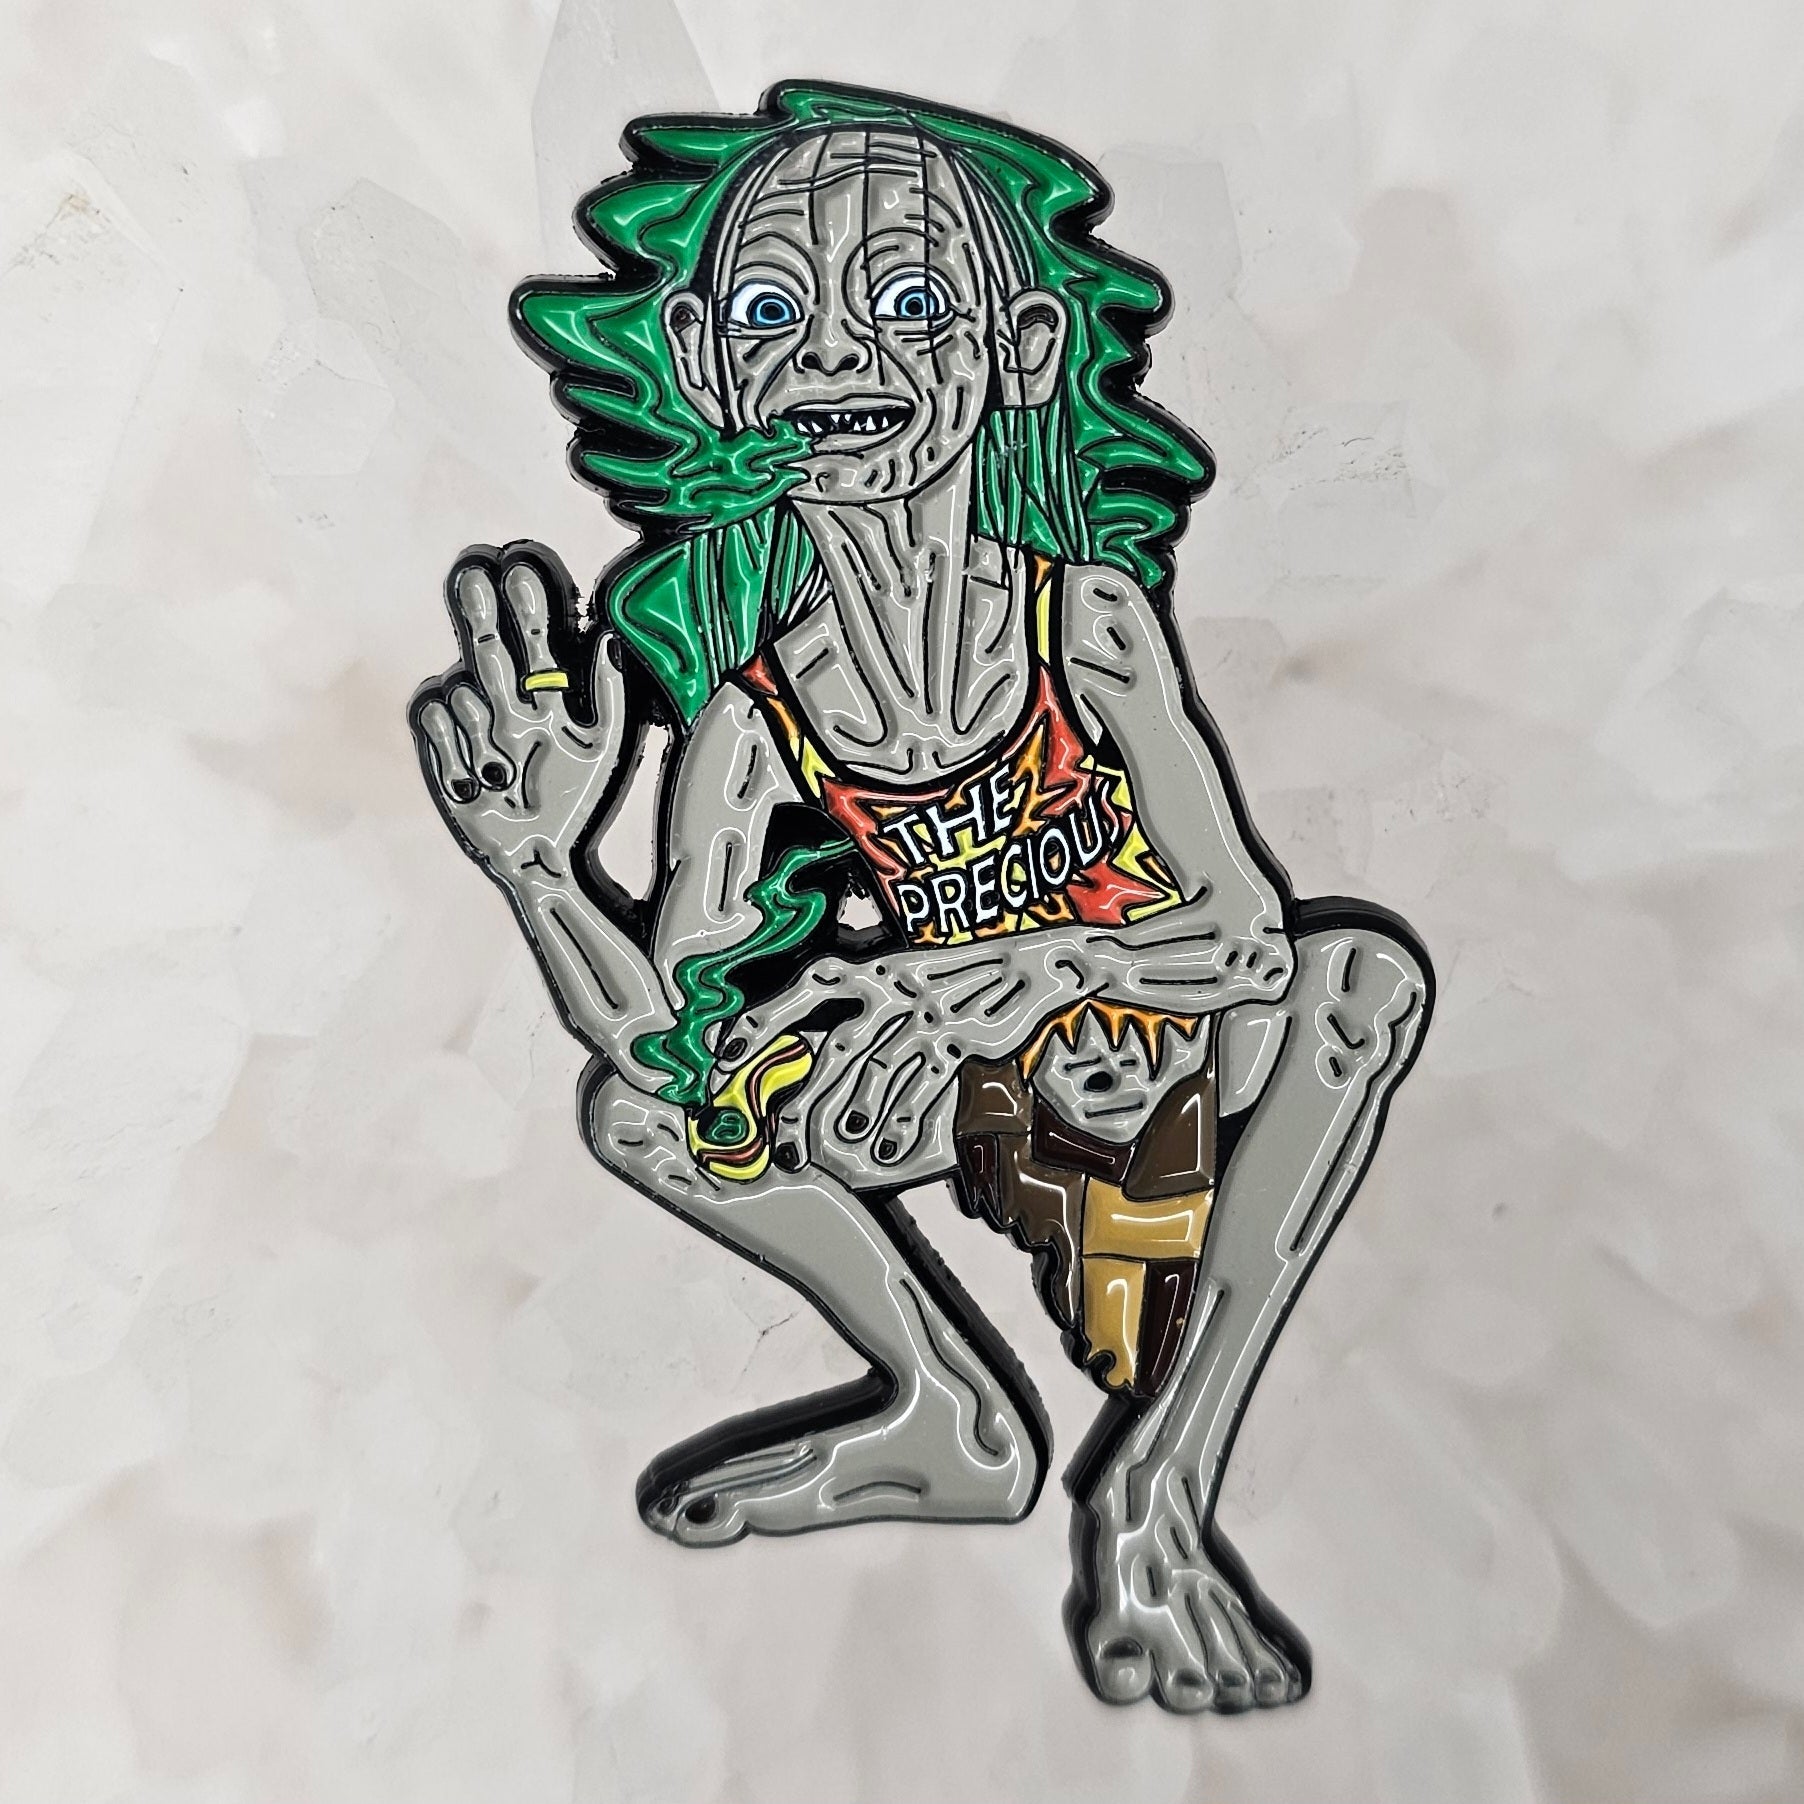 10 Pack - Festie Smeagol The Precious Hippie Lord Of The Weed Gollum Smoke Rings Stoner Wholesale Enamel Pins Hat Pins Bulk Lapel Pin Brooch Badge Festival Pin